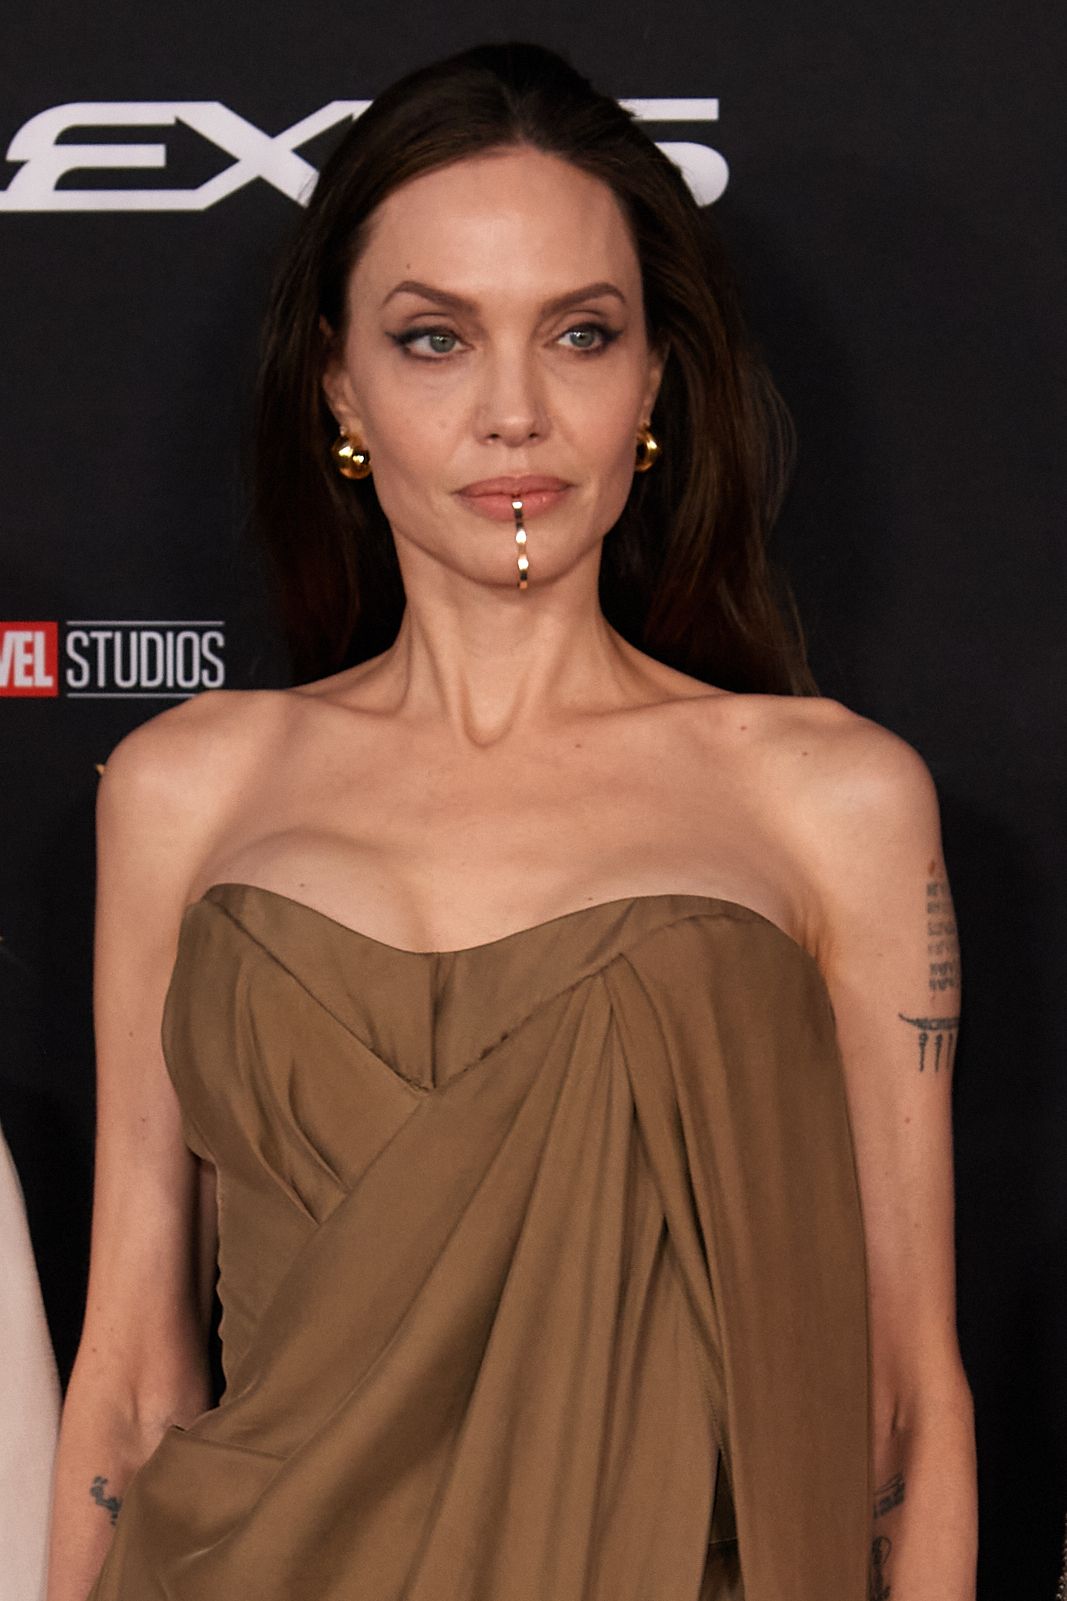 Most rebellious celeb wedding dresses of all time: Angelina Jolie